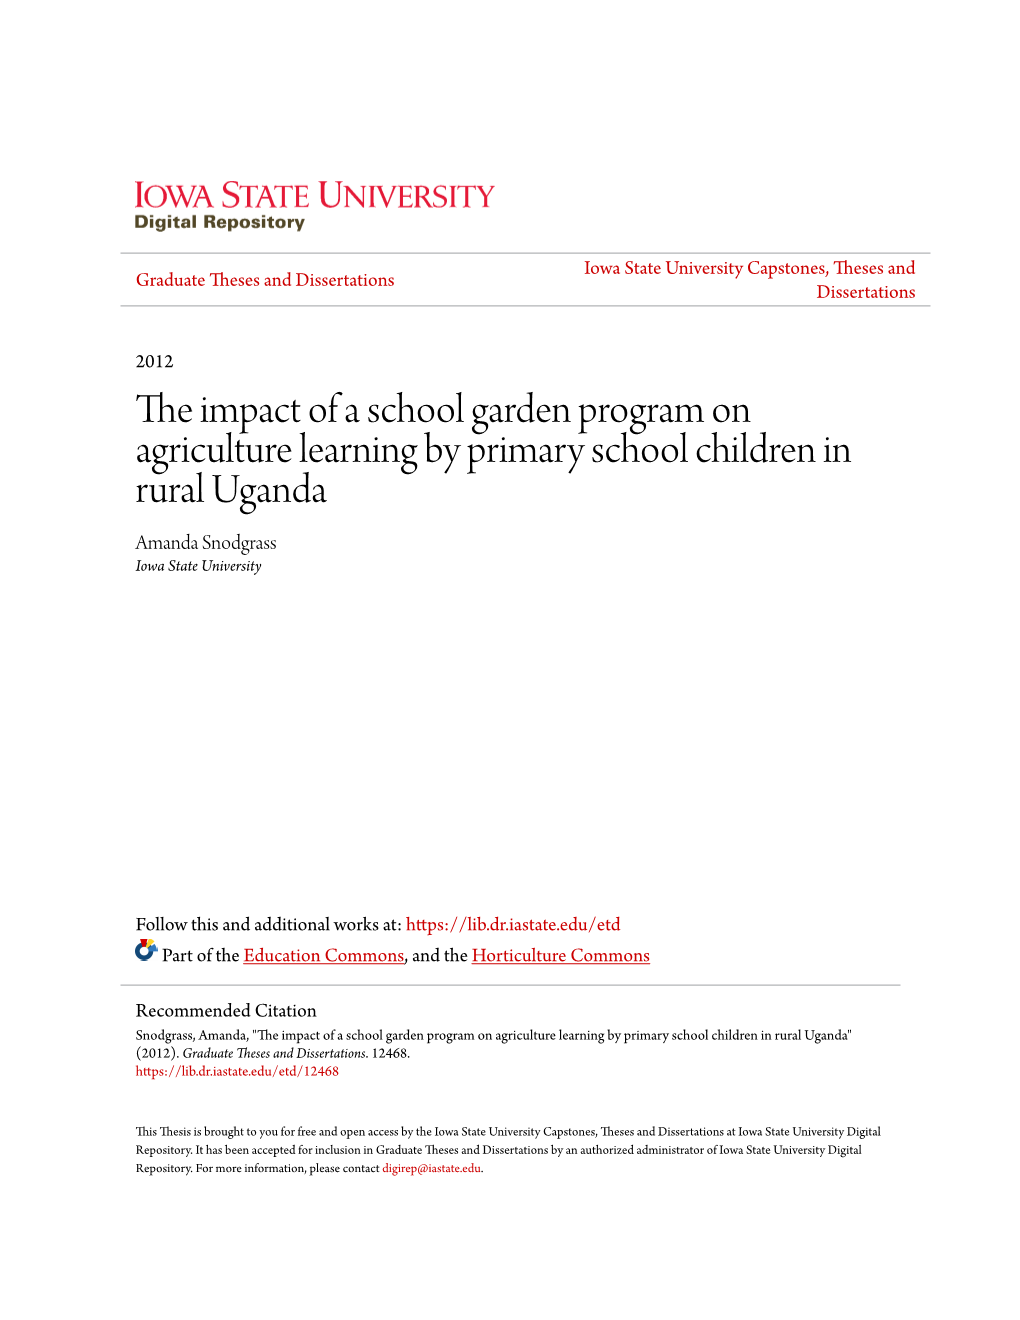 The Impact of a School Garden Program on Agriculture Learning by Primary School Children in Rural Uganda Amanda Snodgrass Iowa State University